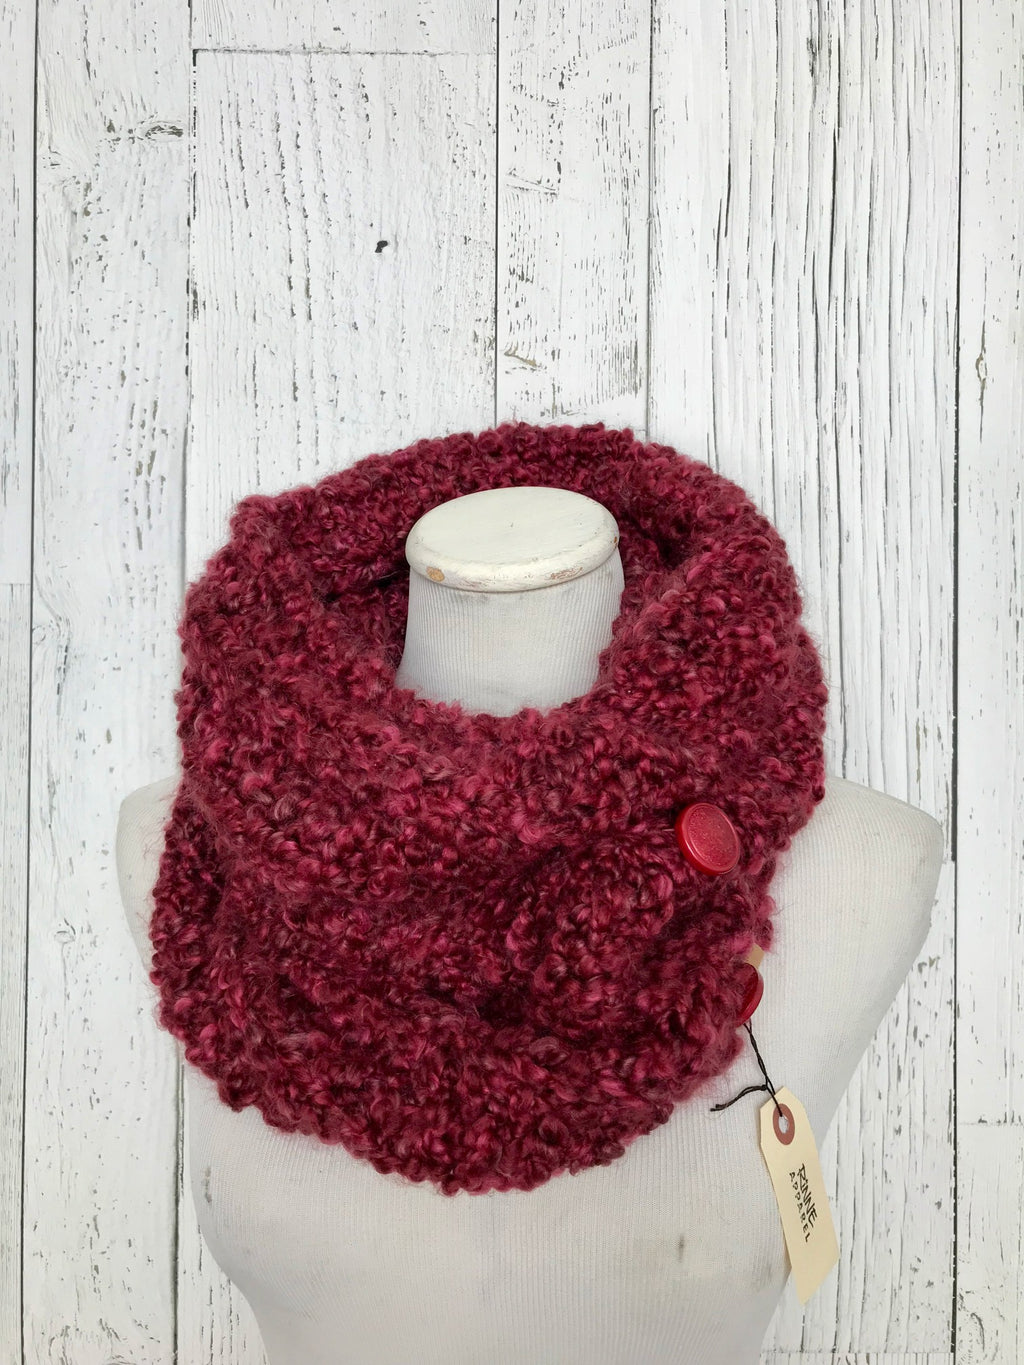 Knit Button Cowl in ruby red with plastic vintage buttons